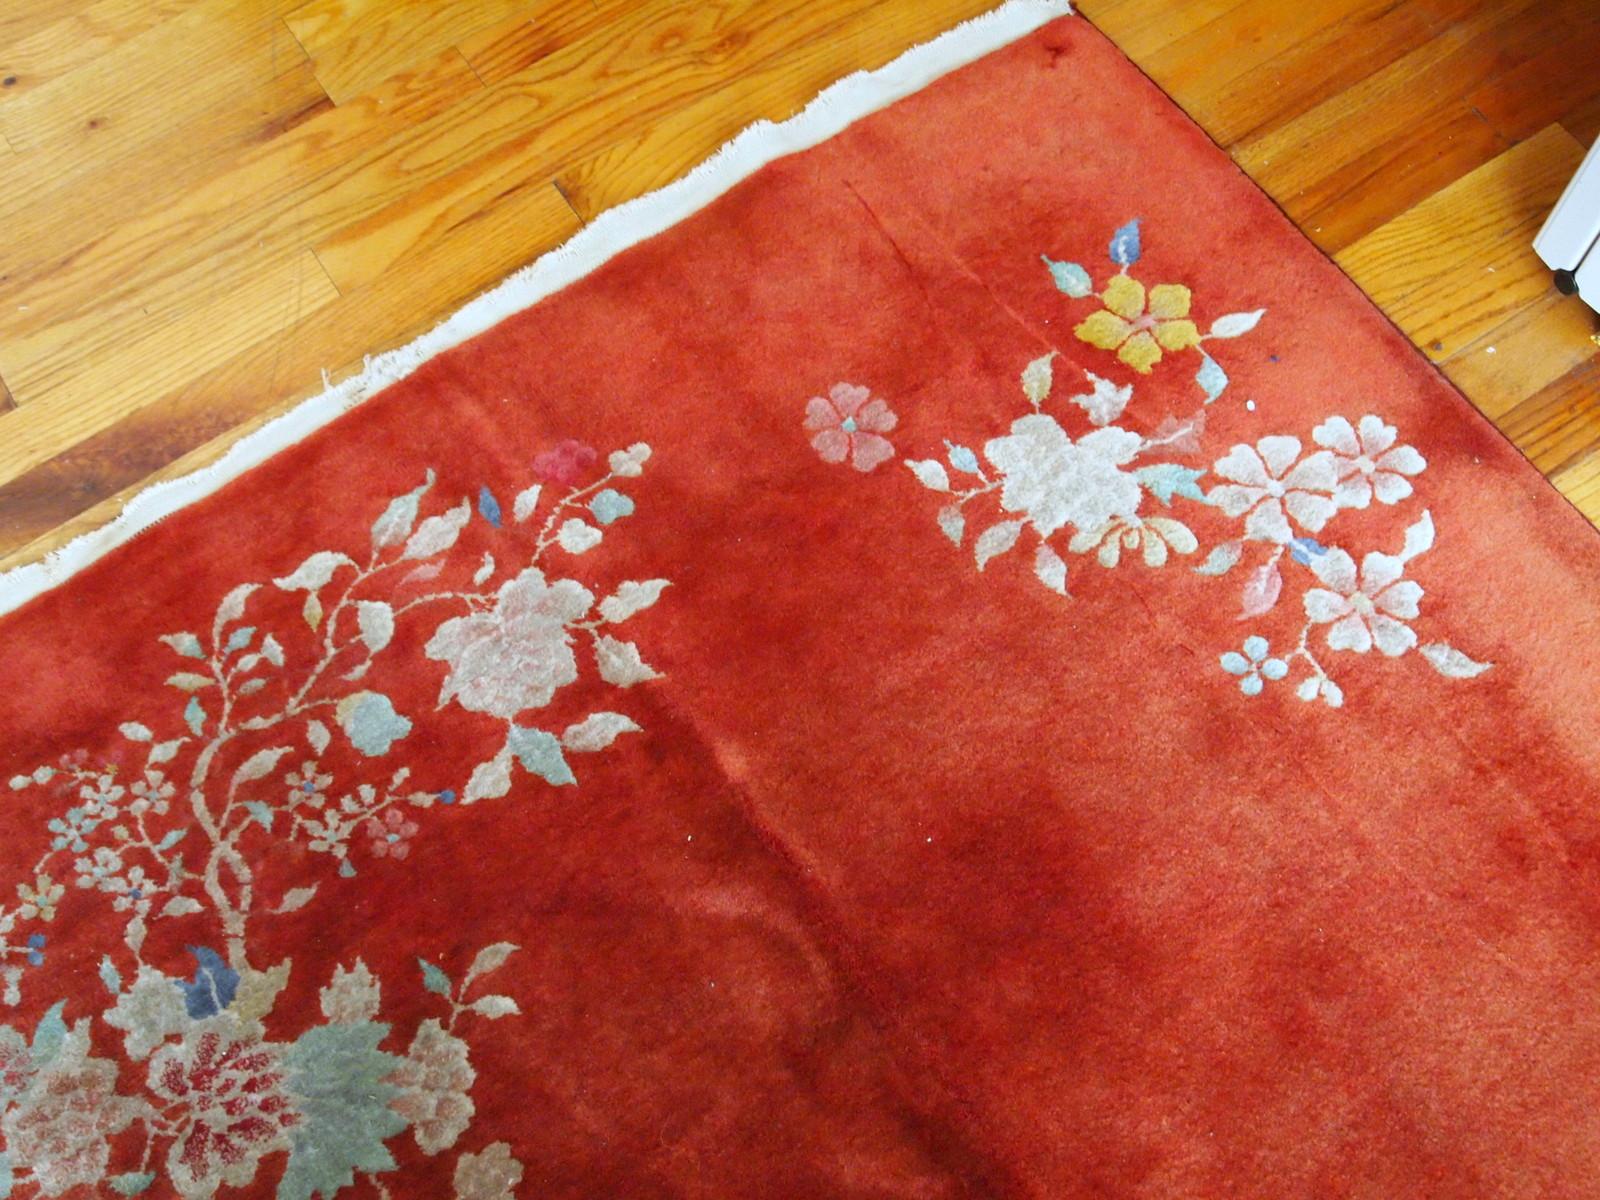 Handmade antique Art Deco Chinese rug in bright orange color. The rug is in original good condition, made in the beginning of 20th century.

-condition: original good,

-circa: 1920s,

-size: 4.1' x 6.4' (125cm x 195cm)?,

-material: